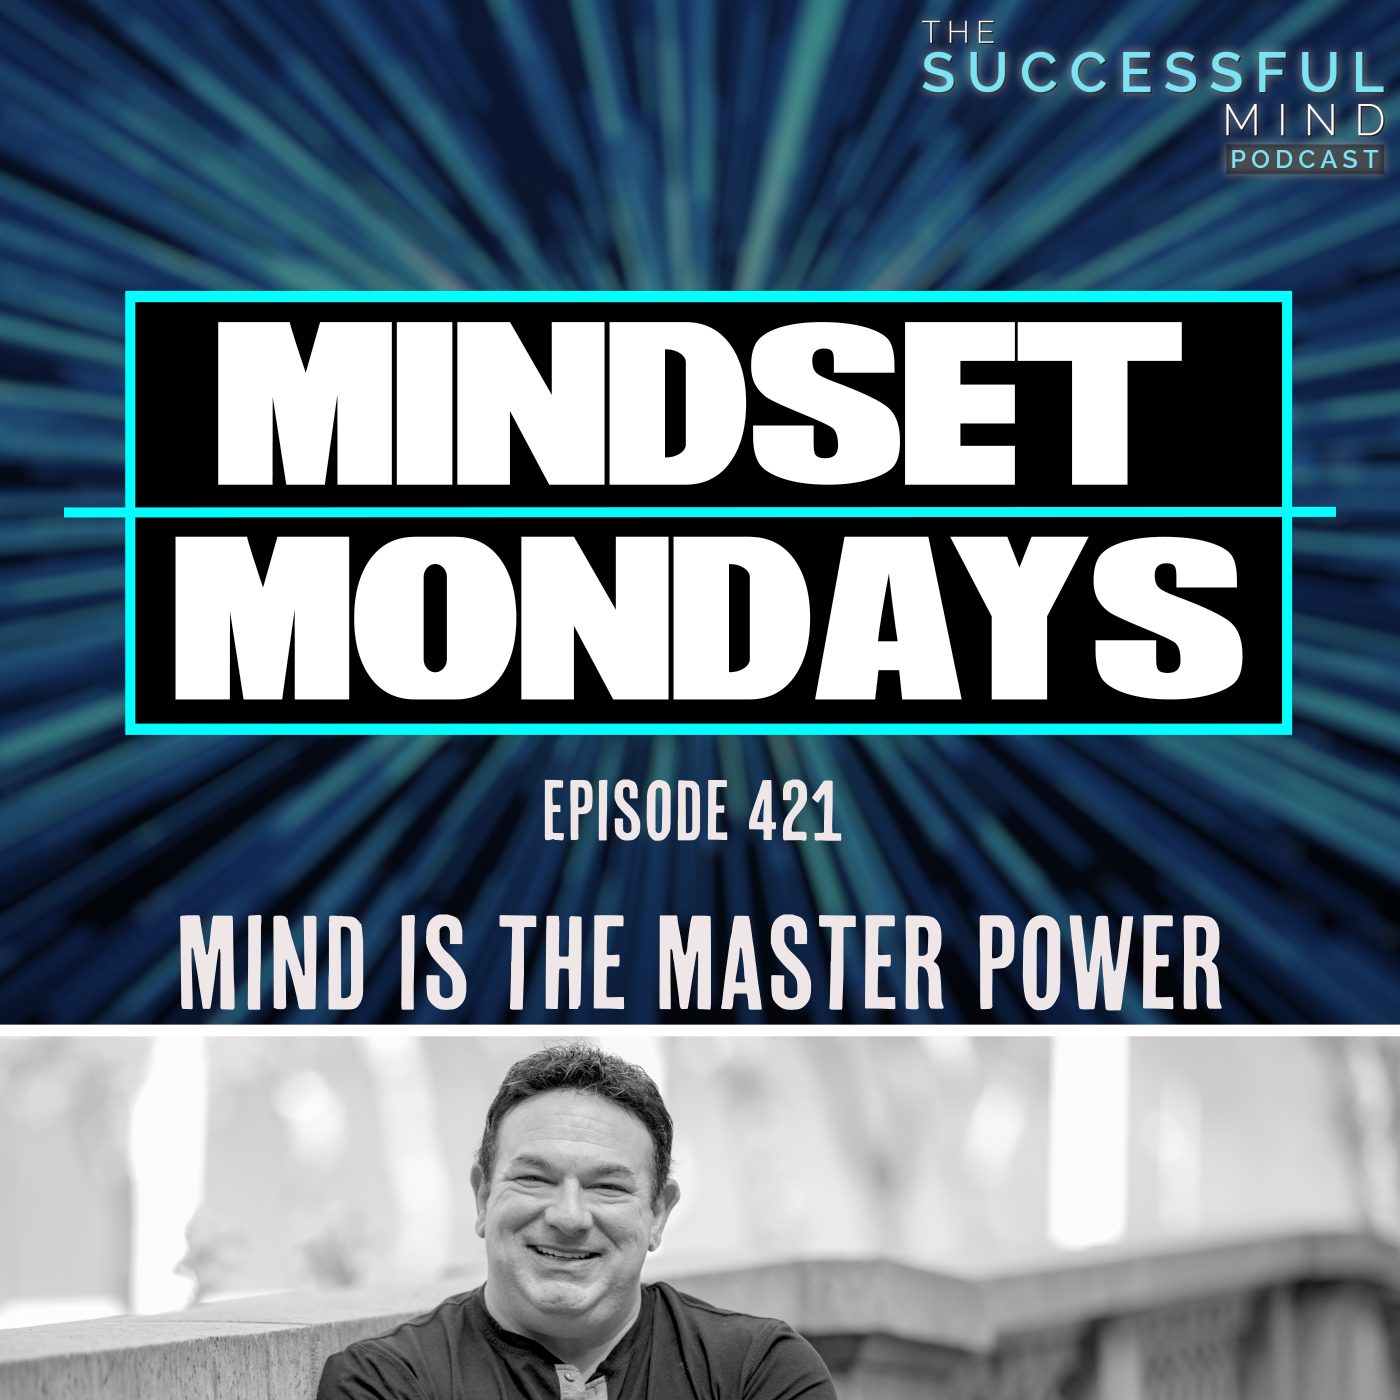 The Successful Mind Podcast - Episode 421 - Mindset Mondays - Mind is the Master Power